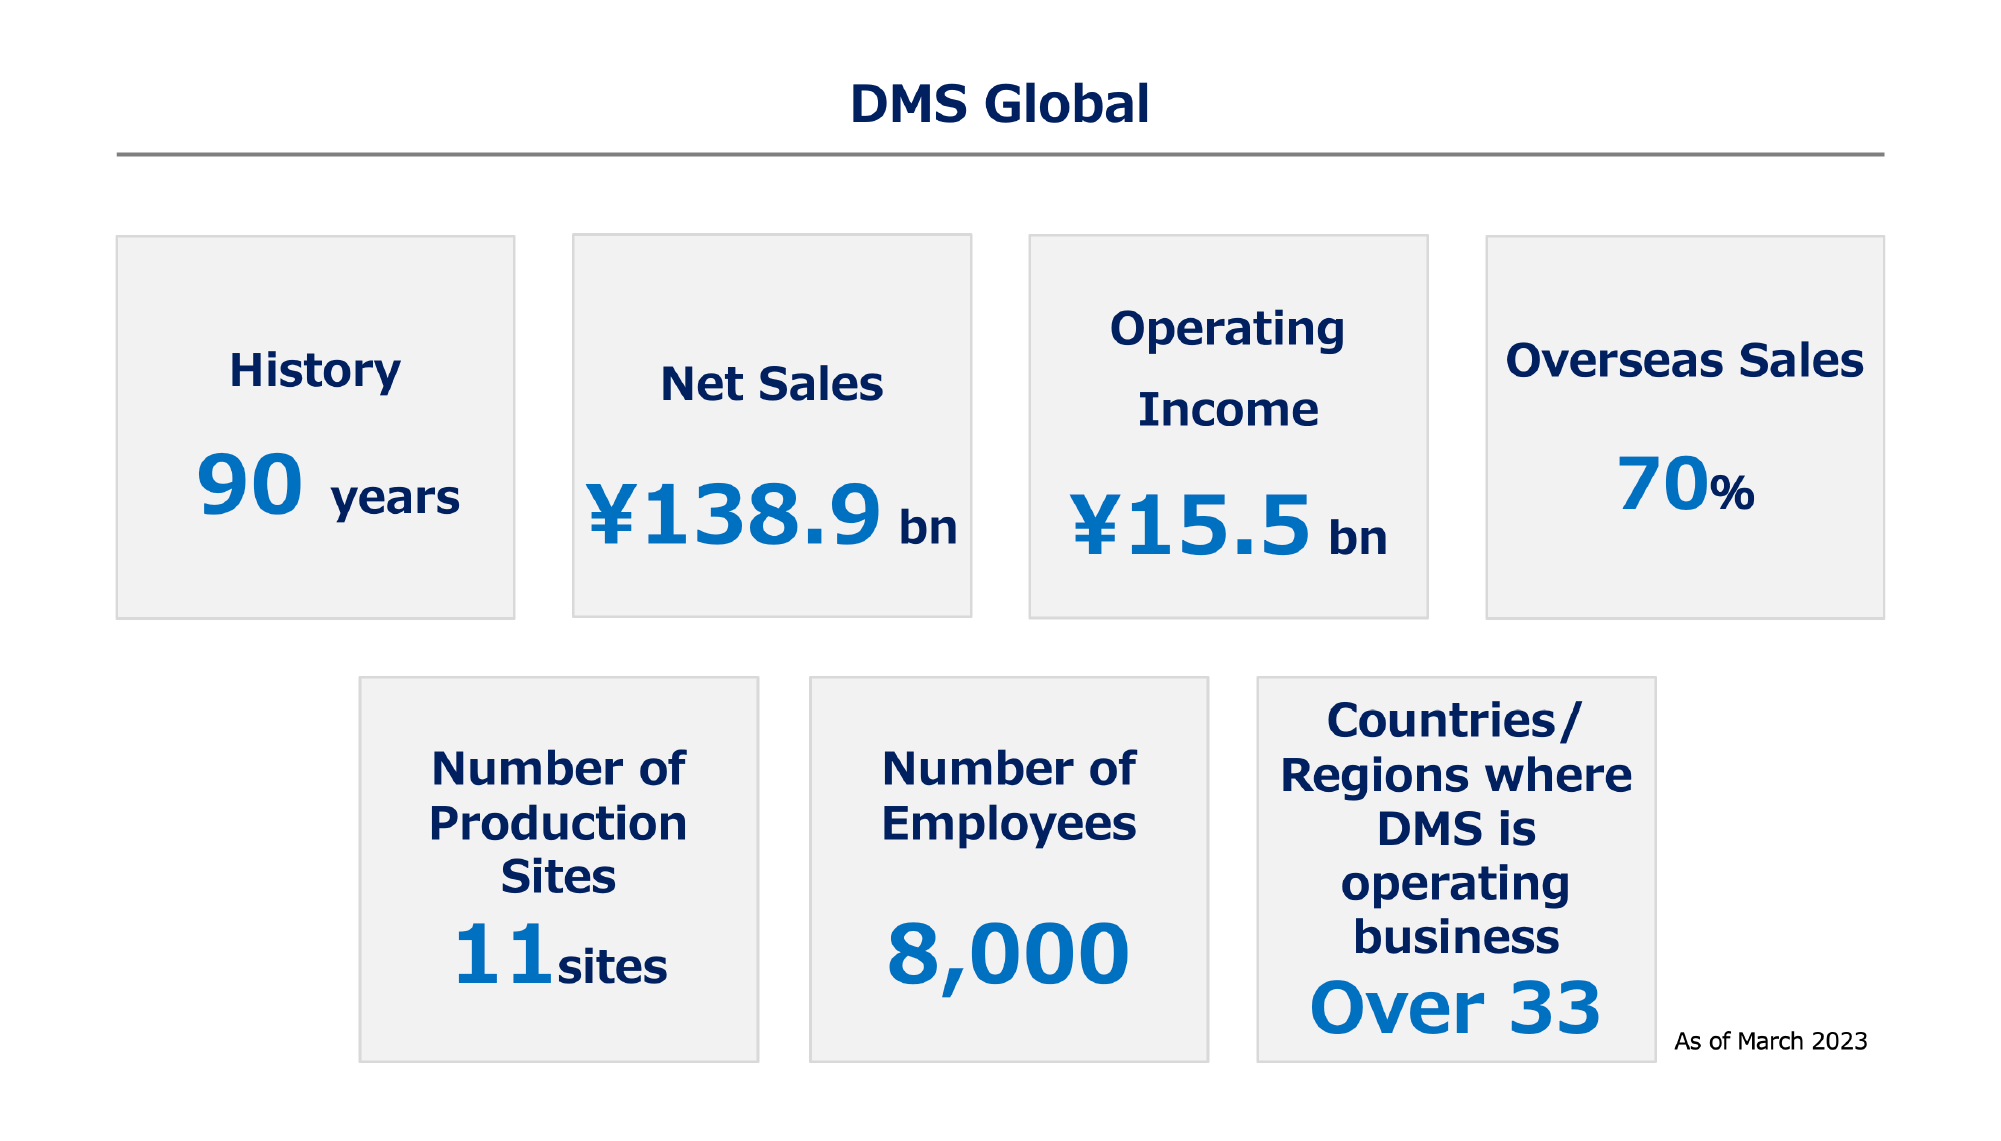 DMS Global(History 90 years, Net Sales 138.9 bn, Operating Income ¥15.5 bn, Overseas Sales 70％, Number of Production Sites 11sites, Number of Employees 8,000, Countries/Regions where DMS is operating business Over 33) As of March 2023